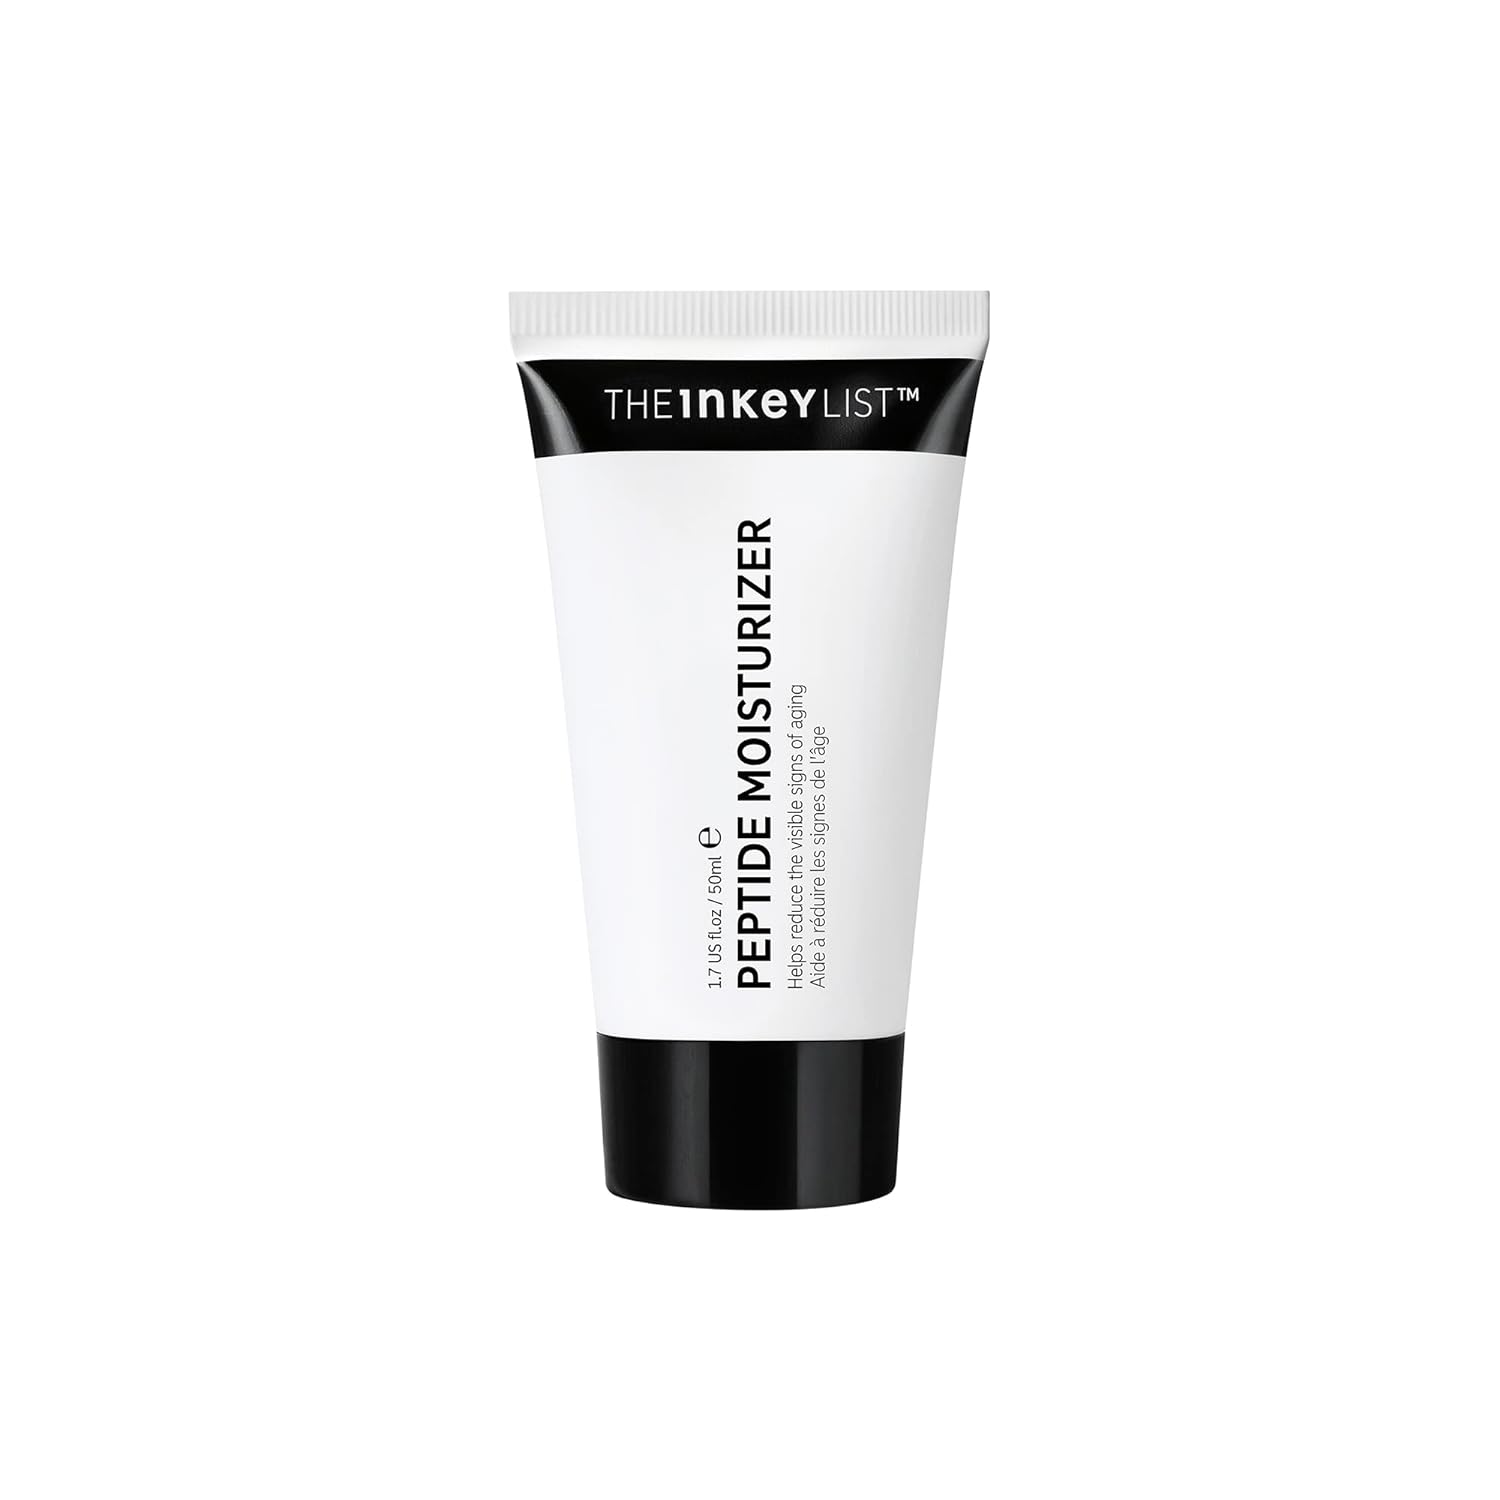 Product image of The INKEY List Peptide Moisturizer, a cream that's a notox treatment